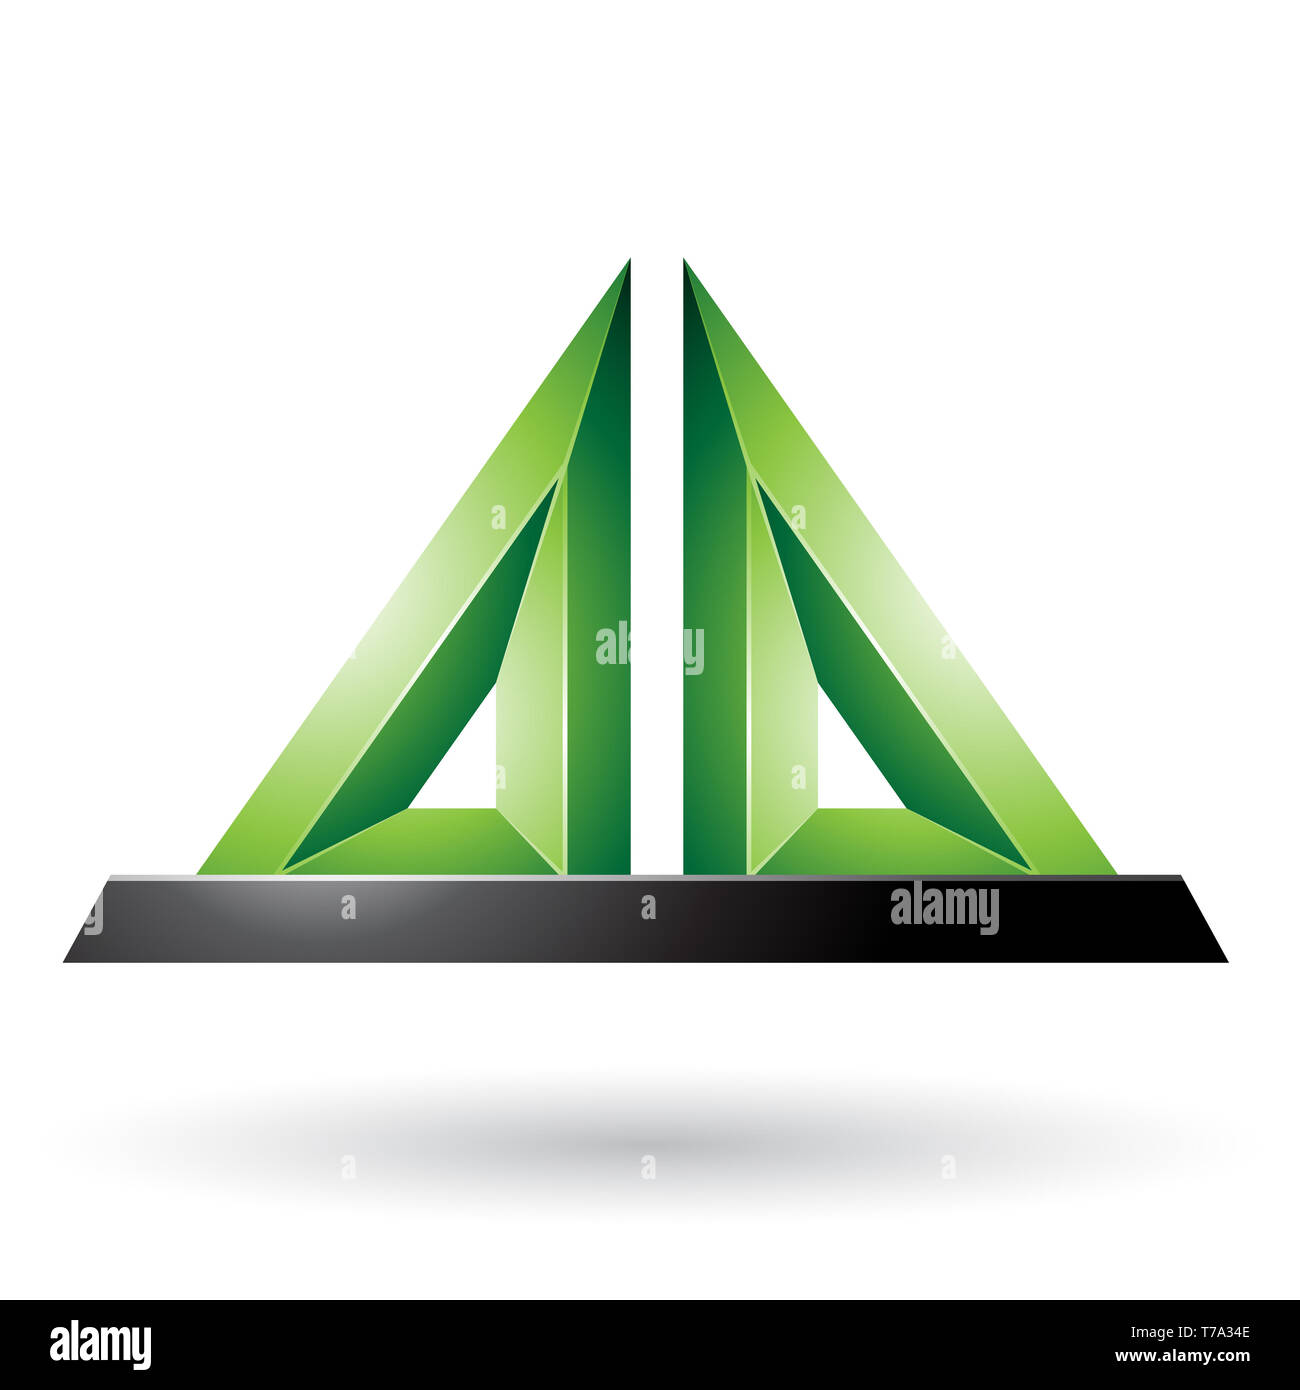 Vector Illustration of Green 3d Pyramidical Embossed Shape isolated on a White Background Stock Photo